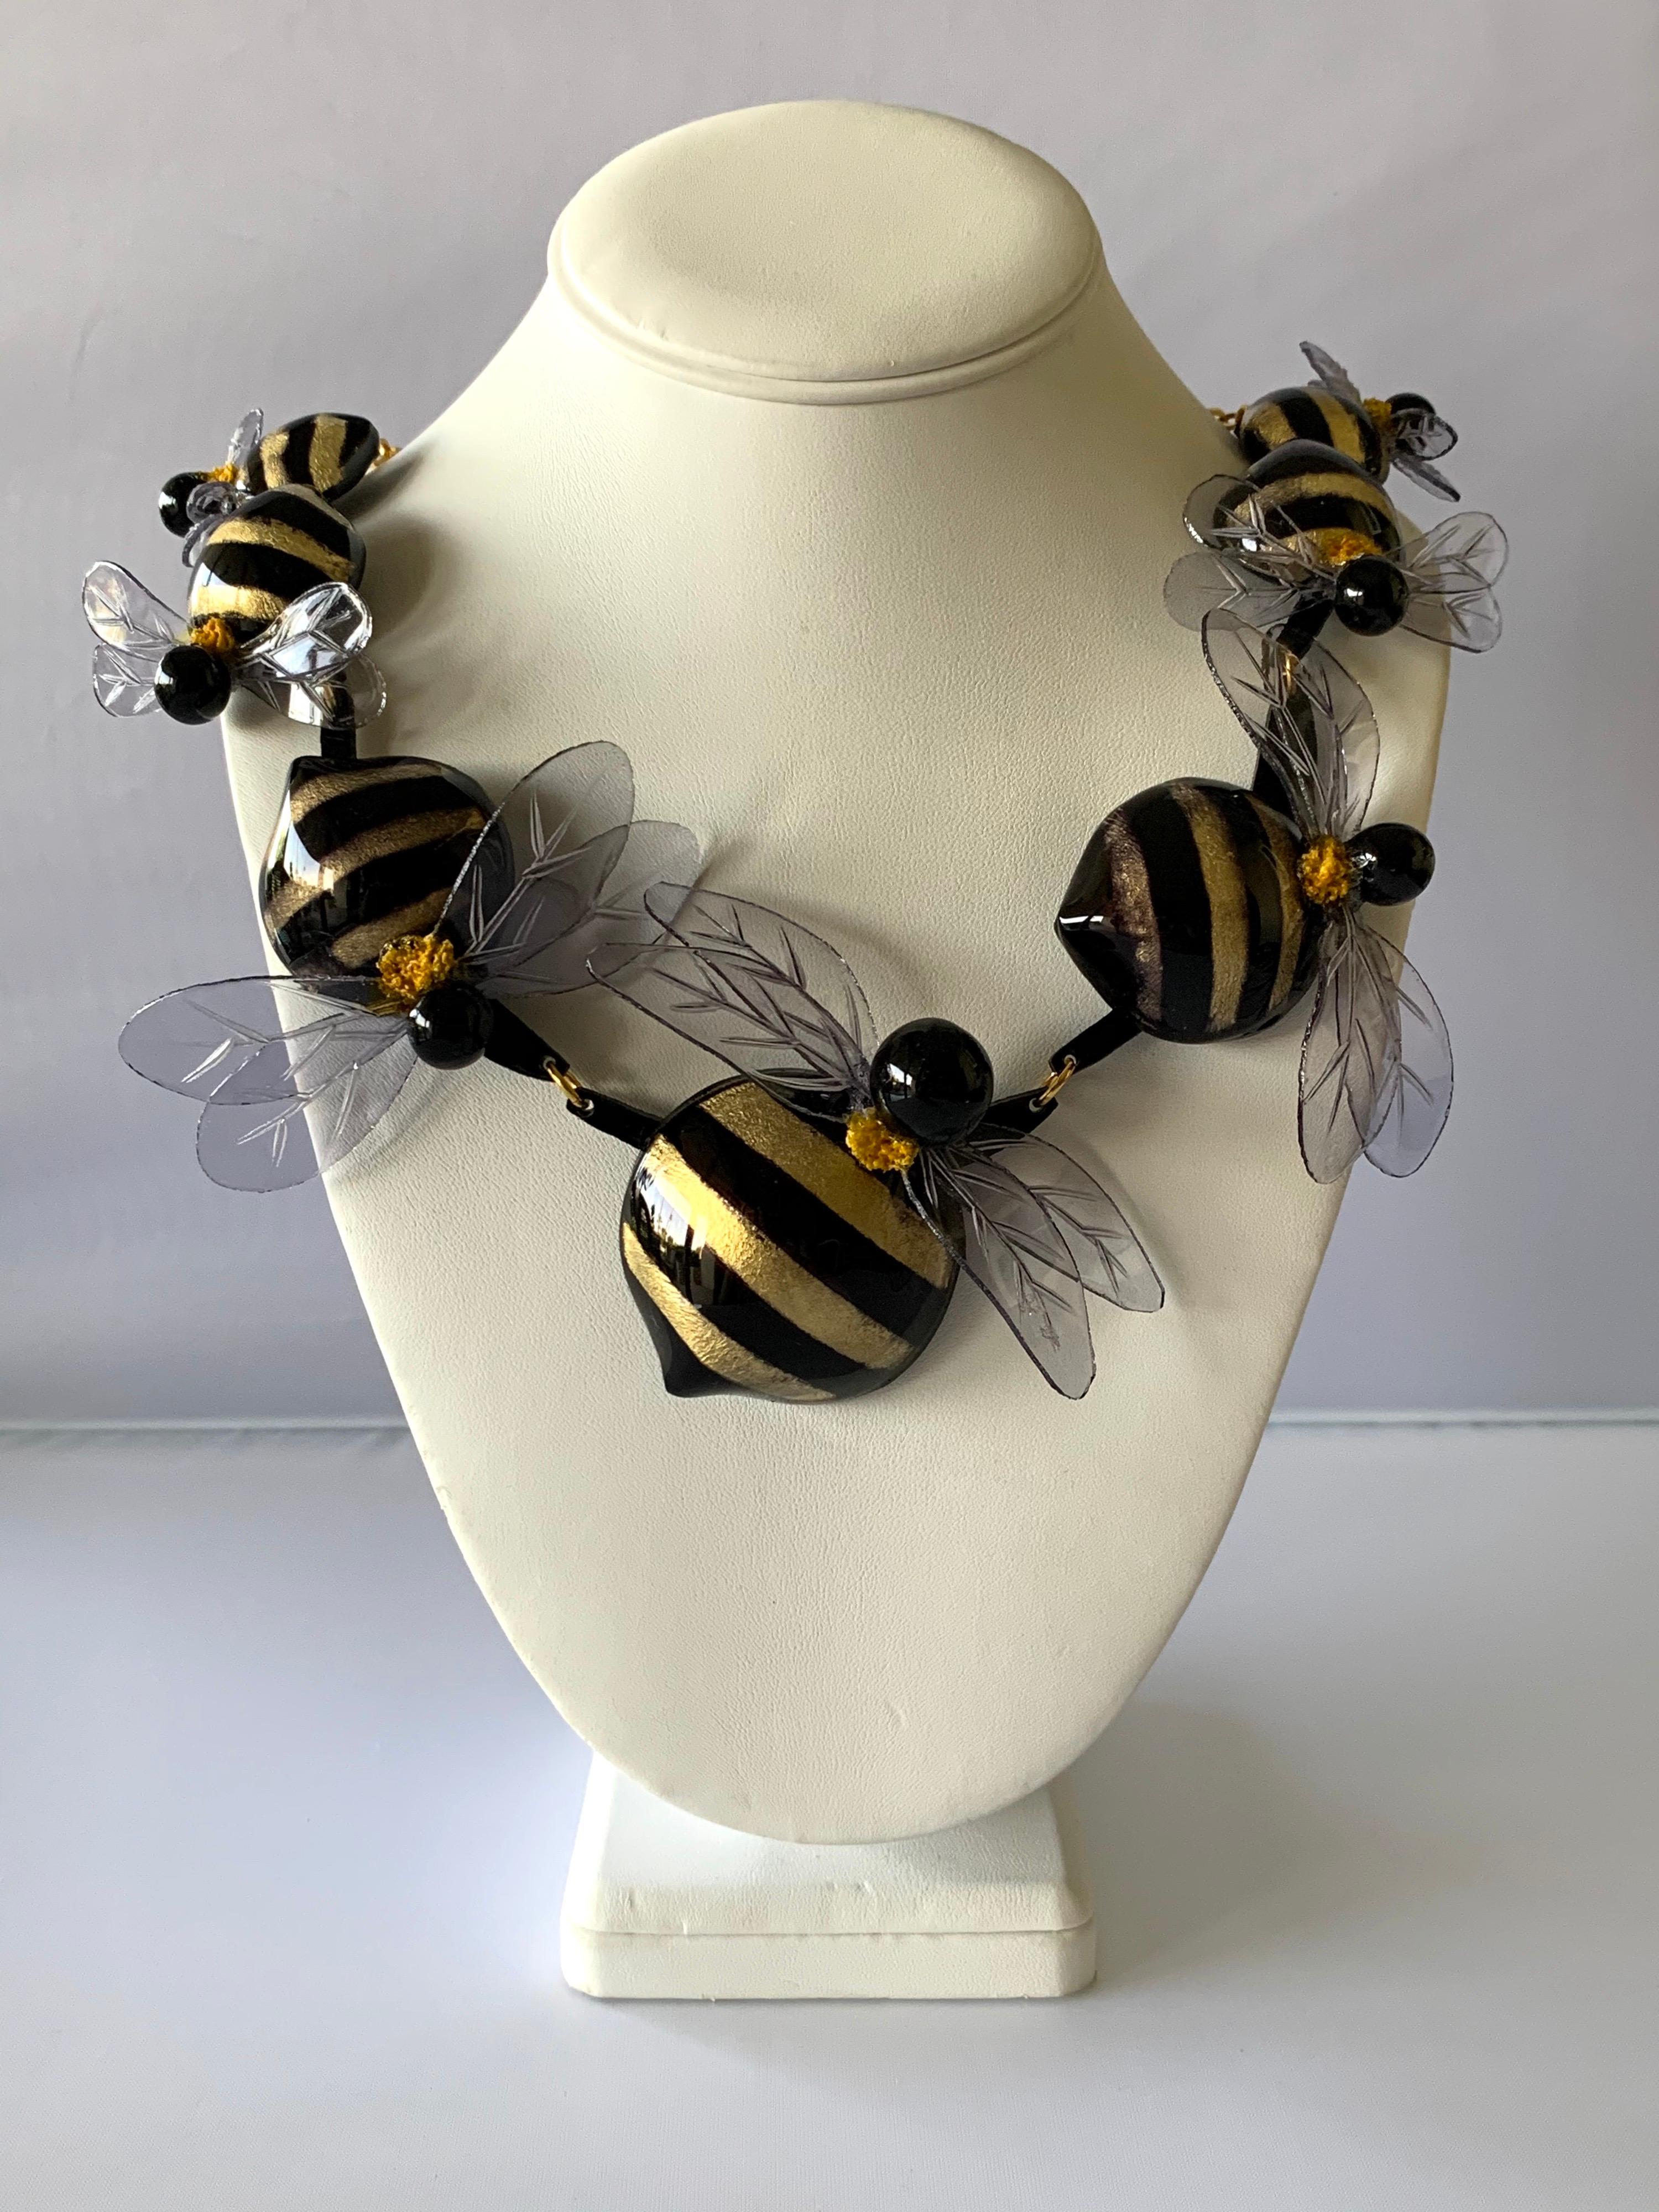 Contemporary designer bumblebee statement necklace by Cilea Paris - the bold necklace is comprised out of a row of highly adorned enameline (resin and enamel) gold and black bumblebees. The bumblebees are in three sizes and they all feature